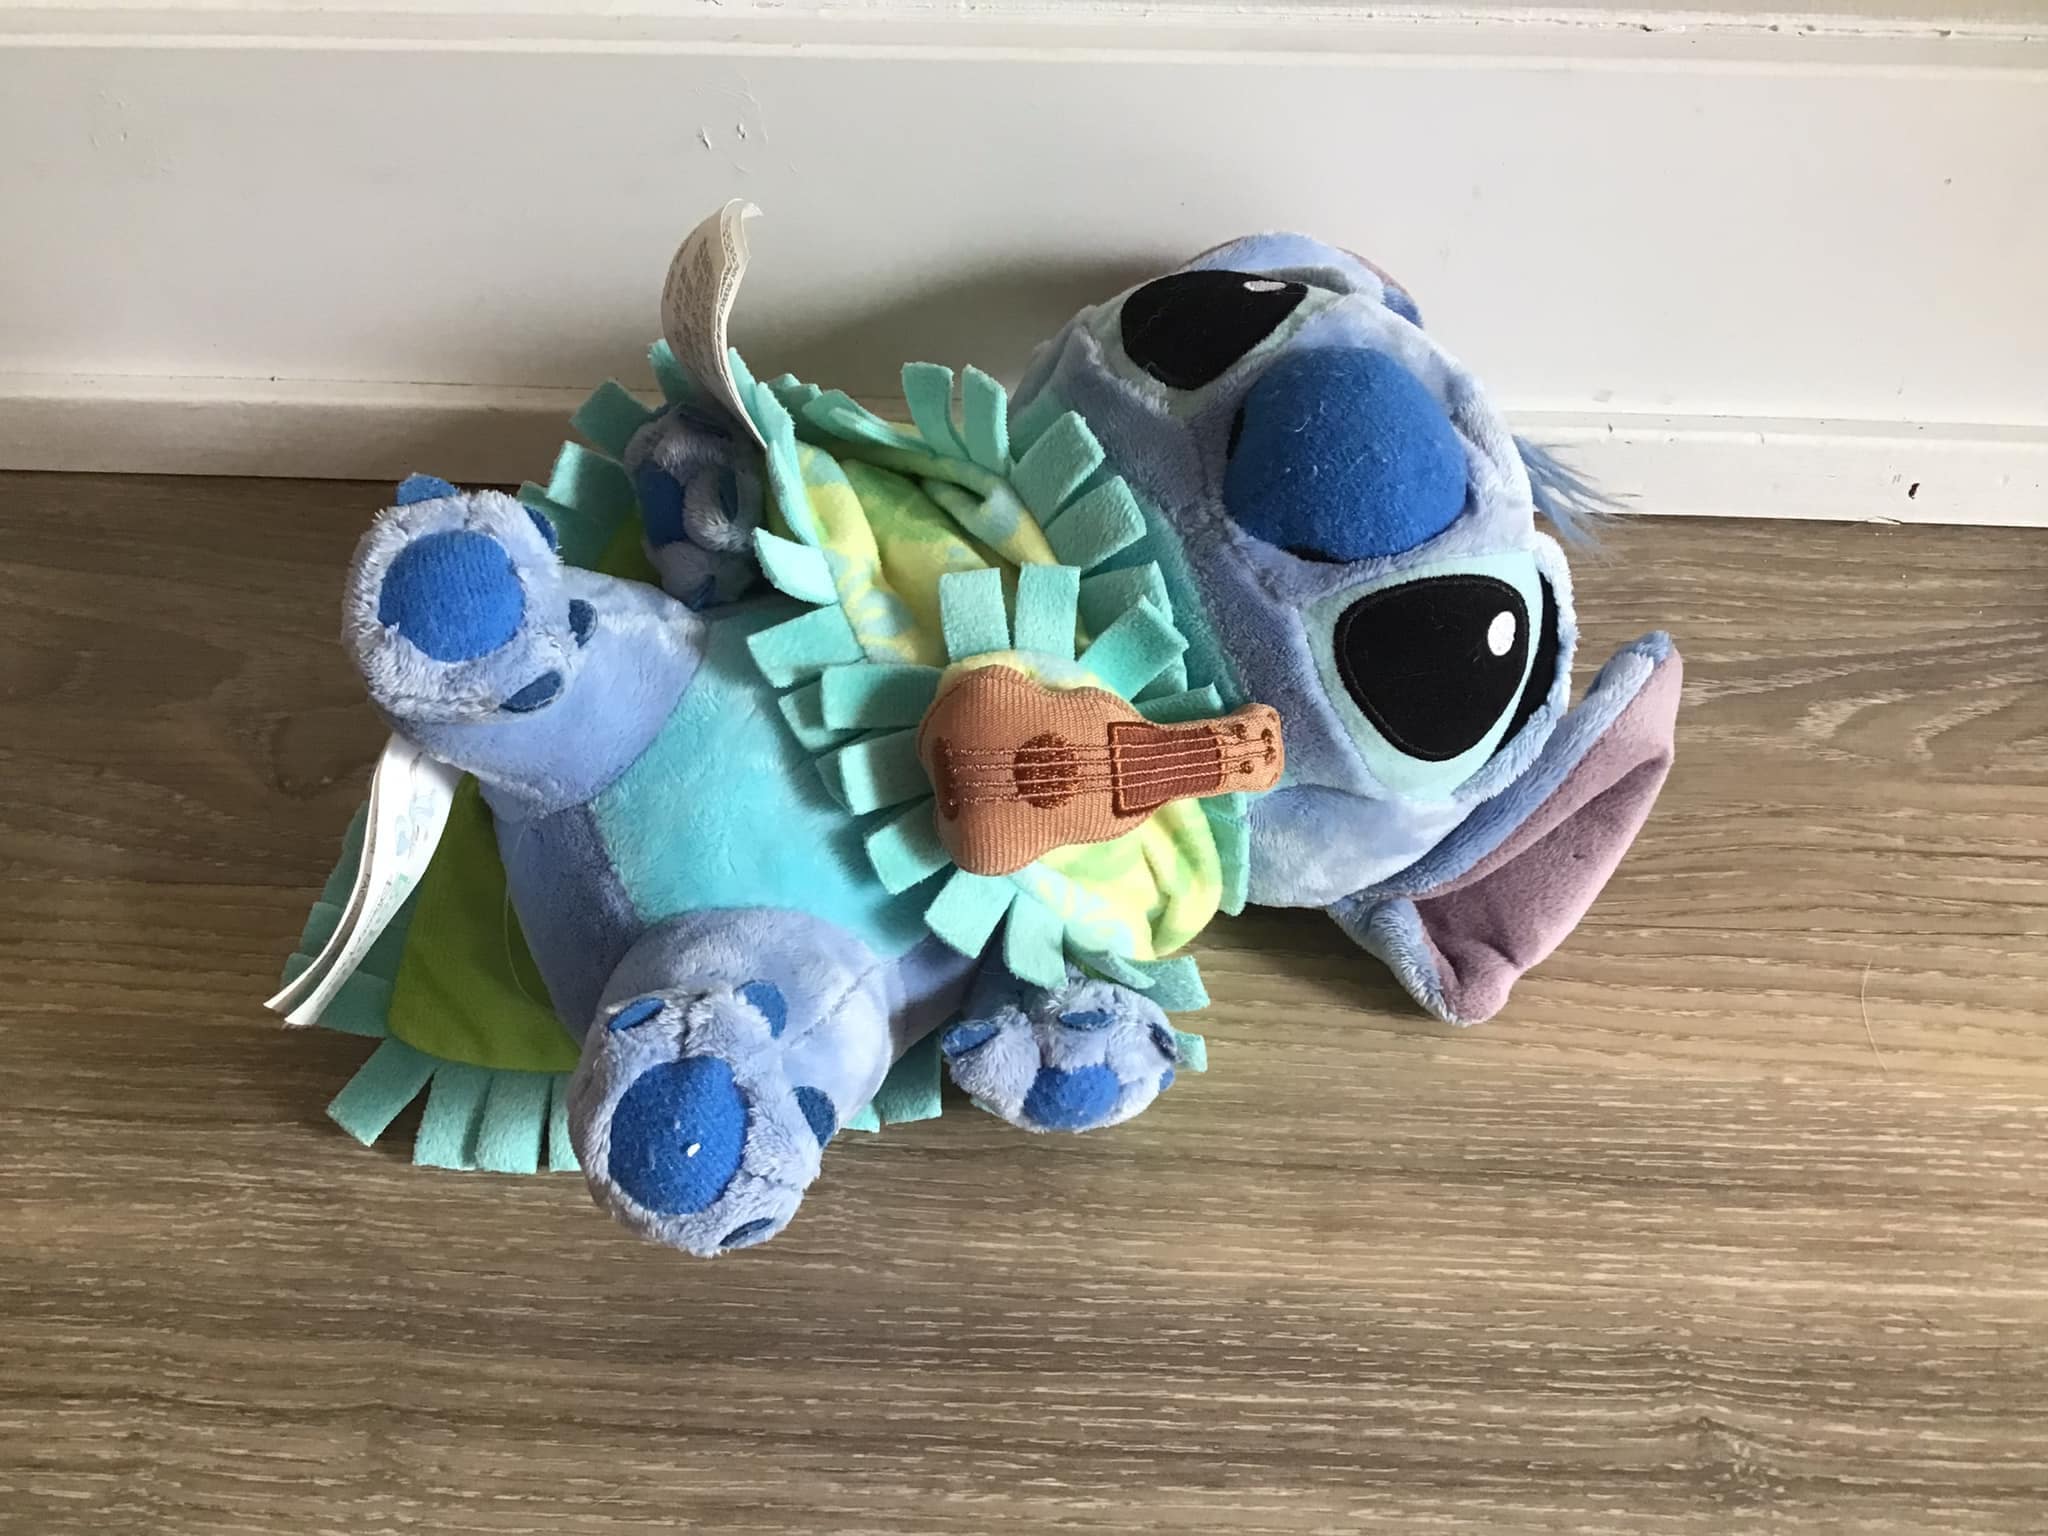 Lilo And Stitch Plush Toys Babies Stitch With Blanket Appease Towel Cute  Stuffed Animals Plush Toy 25cm - Movies & Tv - AliExpress